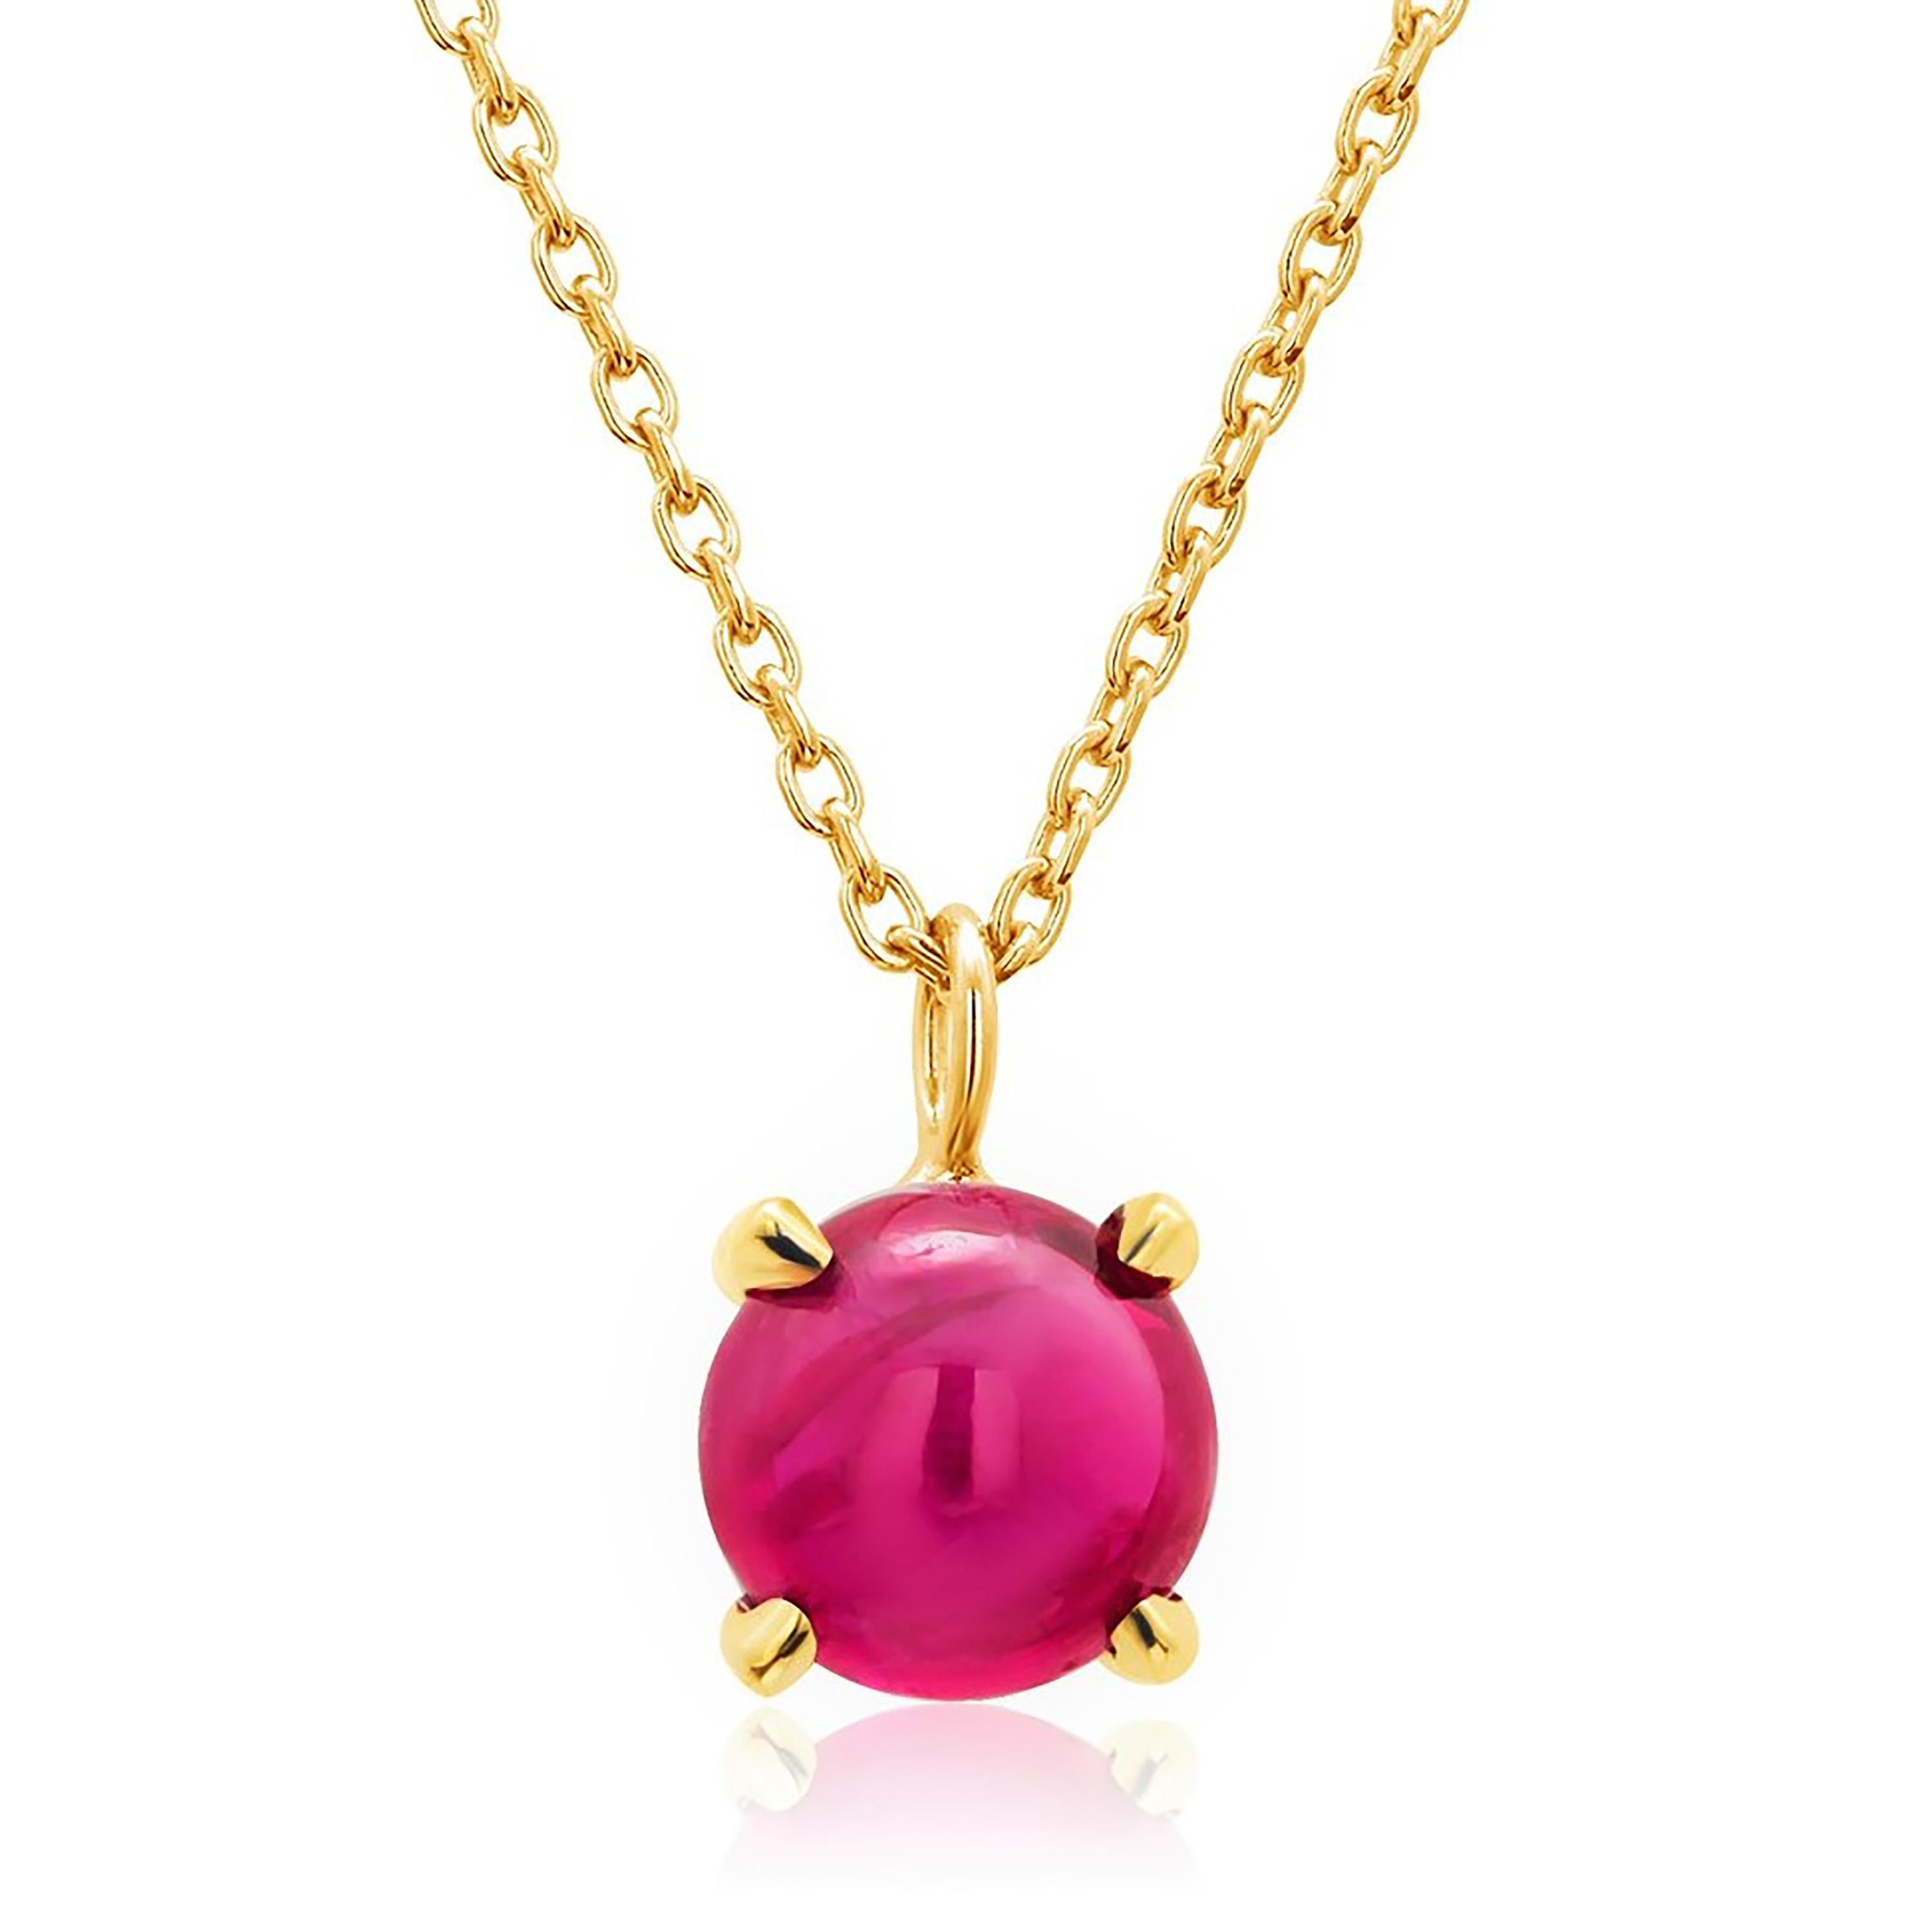 Fourteen karats yellow gold layered drop necklace pendant  
Fine cabochon Burma red ruby weighing 1.20 carat
Necklace measuring 16 inches long
Ruby measuring 6 millimeters
Ruby tone color is rose red
New Necklace
Handmade in the USA